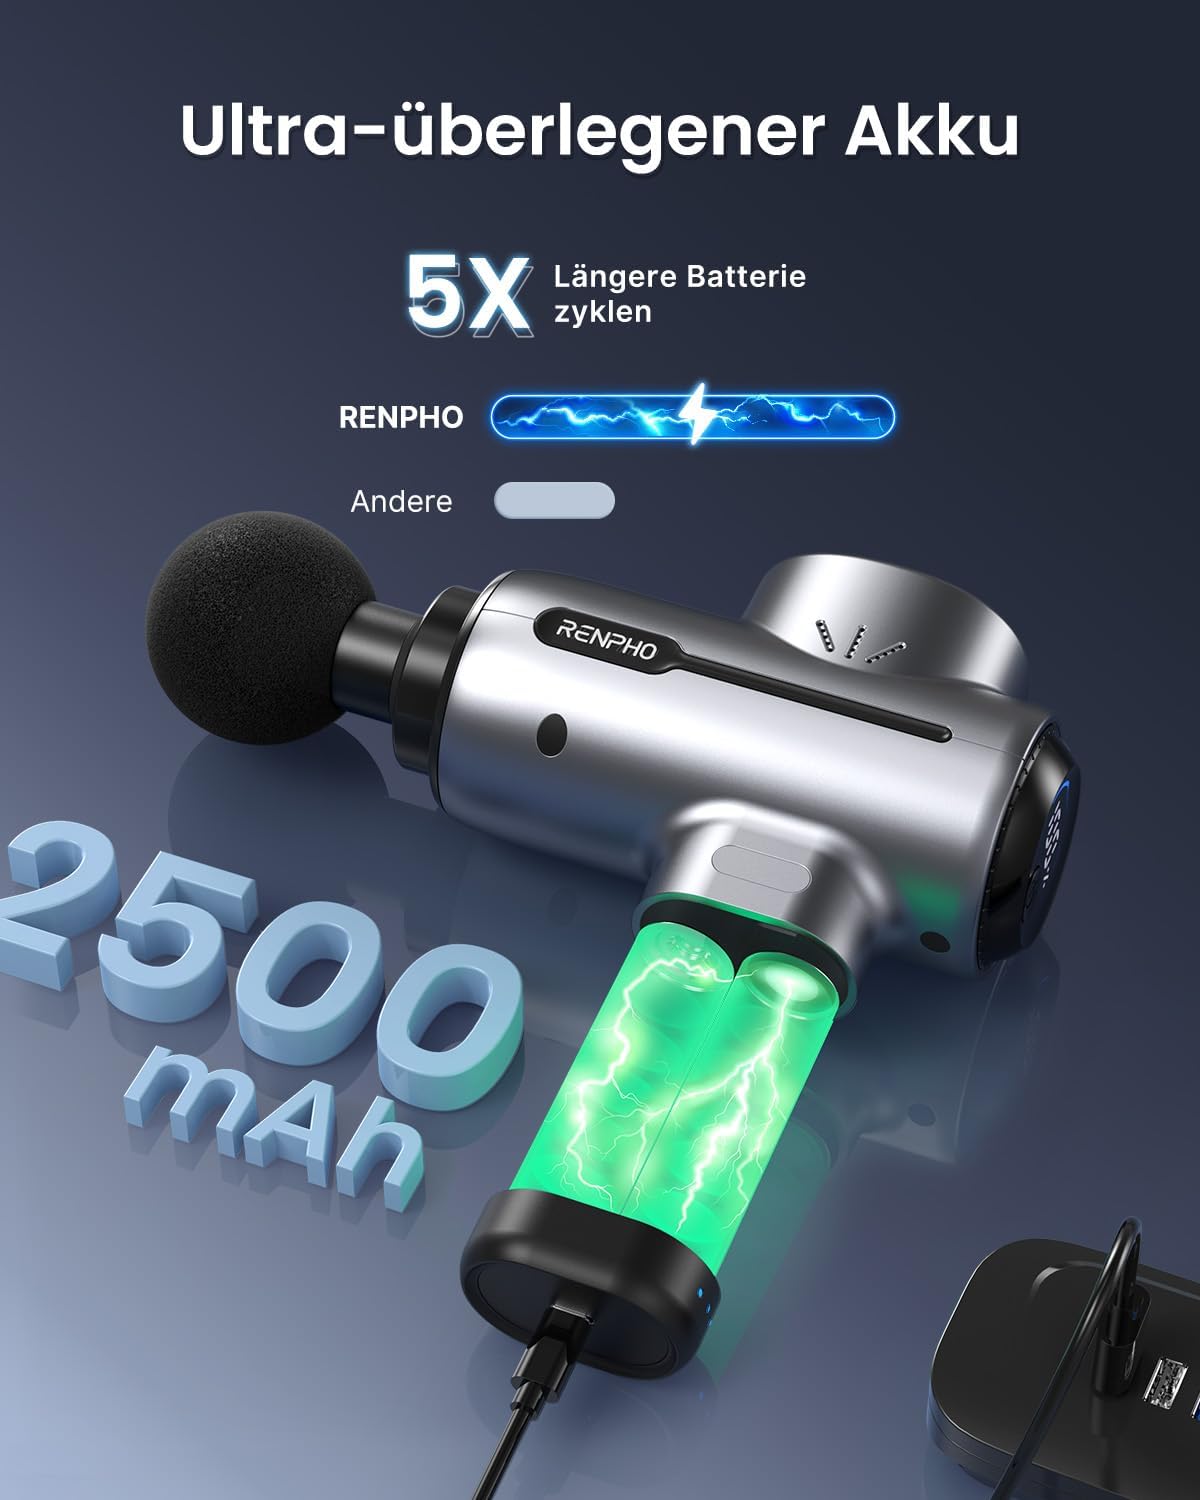 A promotional image of a Renpho EU Massage Gun with Screen in metallic finish displaying battery features, including "ultra-überlegener akku" and "5x längere batterie zyk.